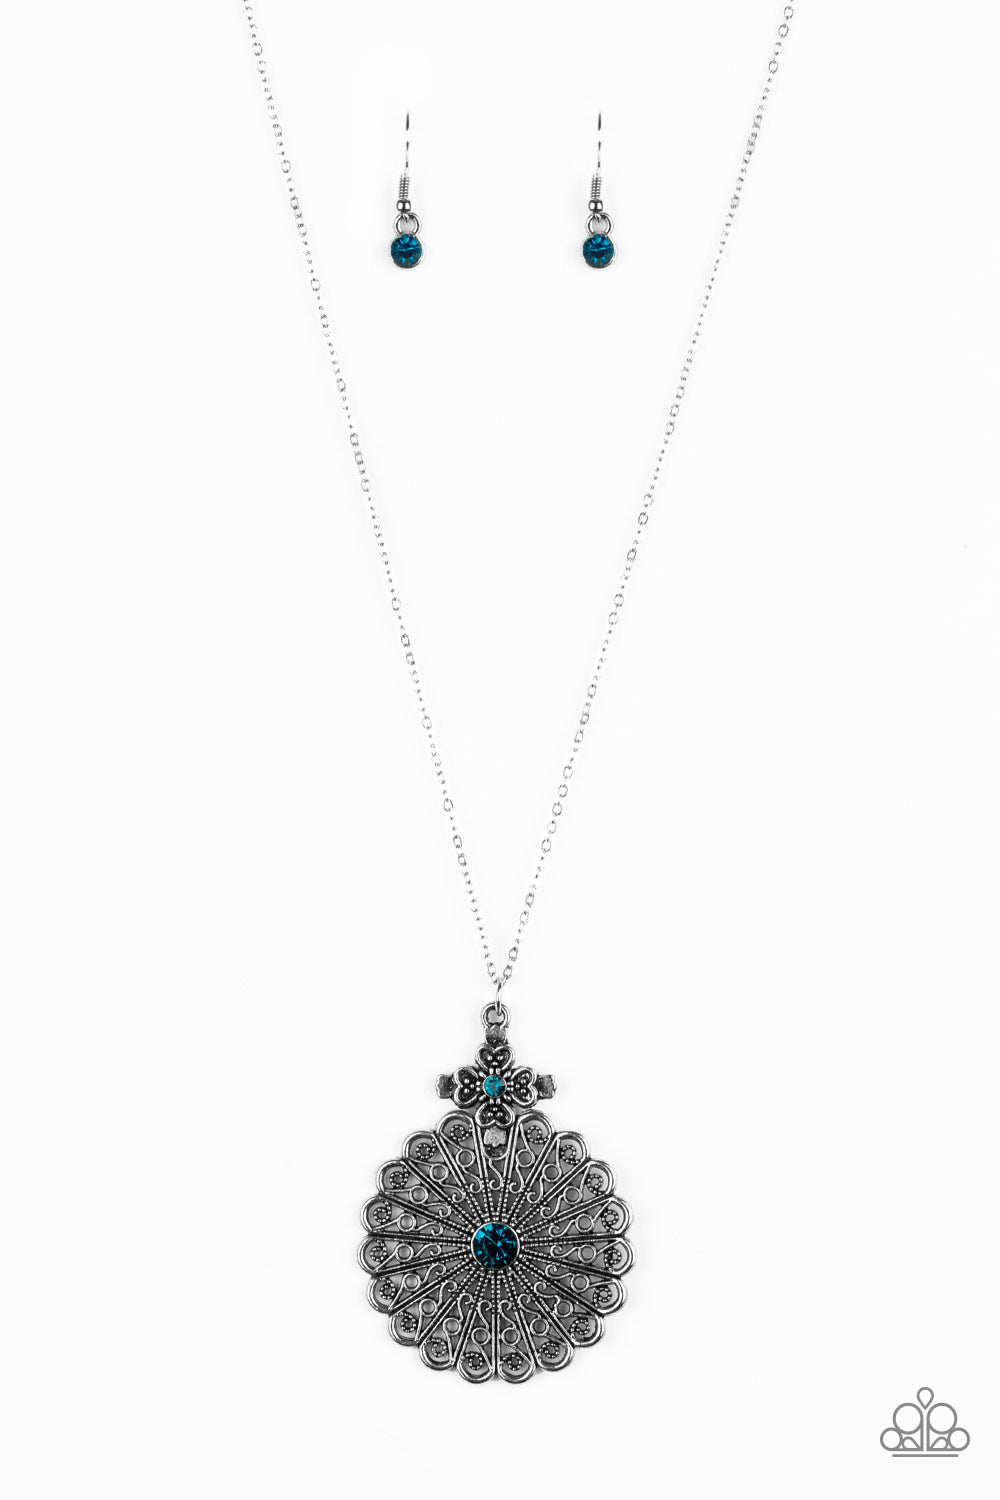 Walk On The WILDFLOWER Side - Blue and Silver Necklace Long Necklaces Bejeweled Accessories By Kristie Featuring Paparazzi Jewelry  - Trendy fashion jewelry for everyone -